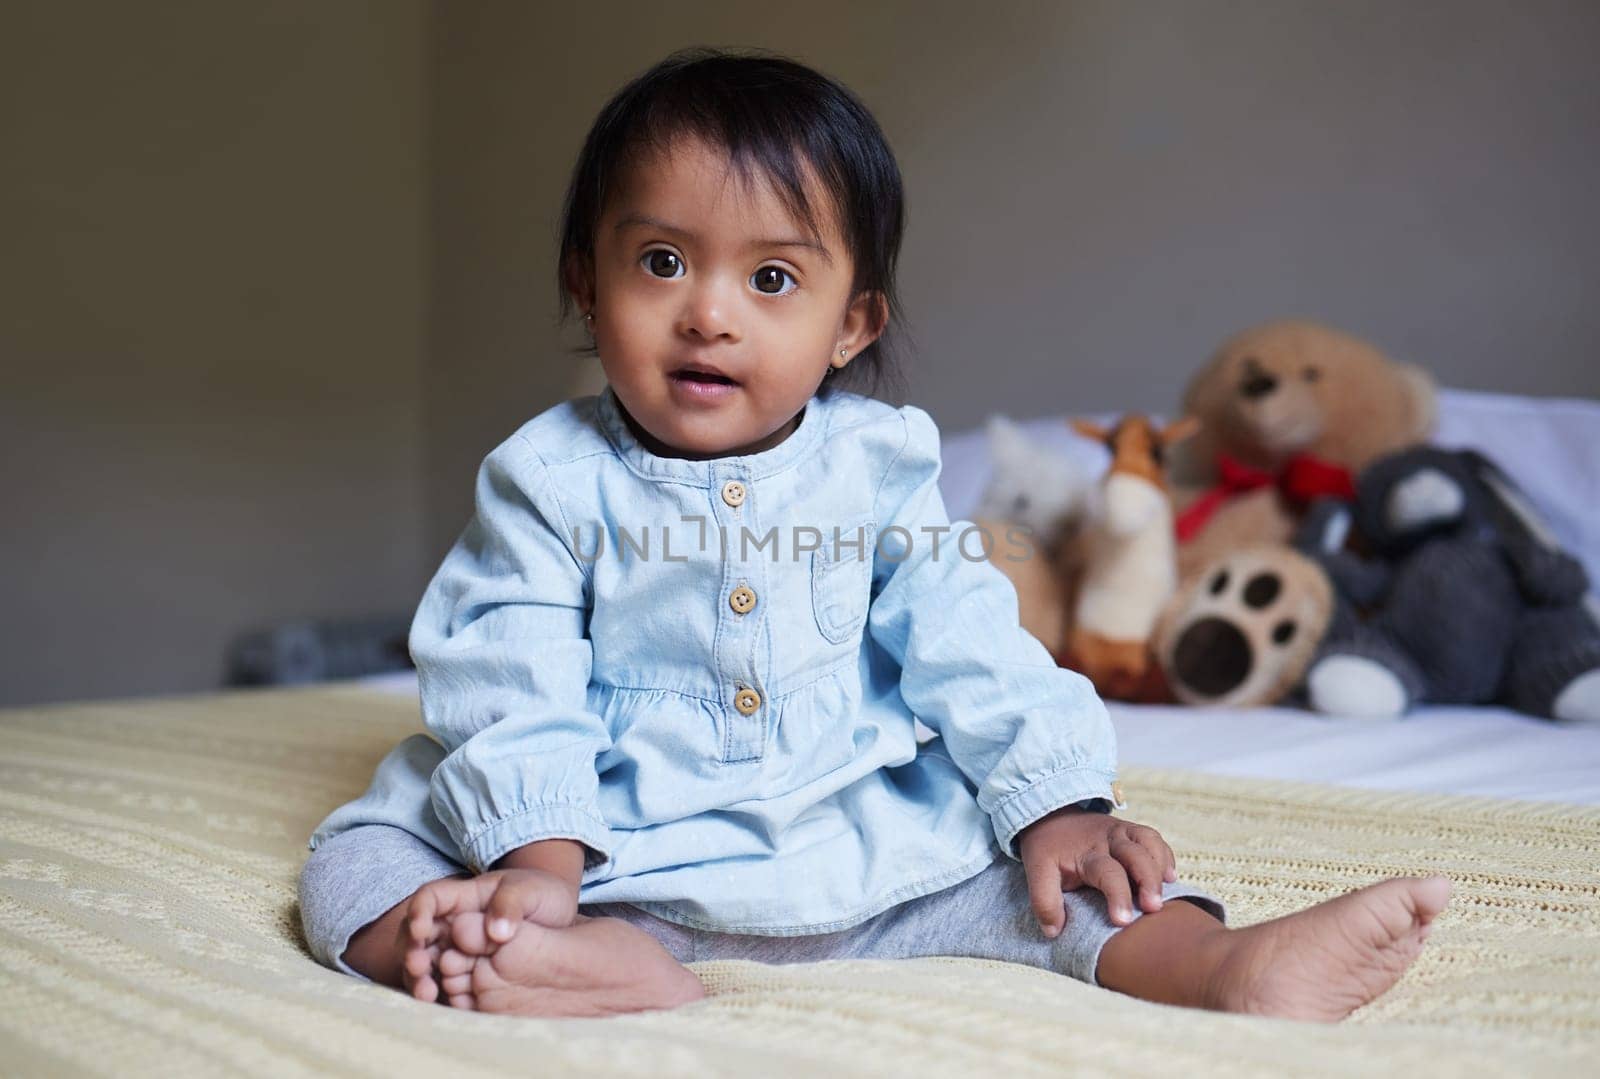 Baby, cute and innocent with a girl on a bed in her home alone with a teddy bear and stuffed toys in the background. Children, small and pure with a female kid in her bedroom in a house in India.